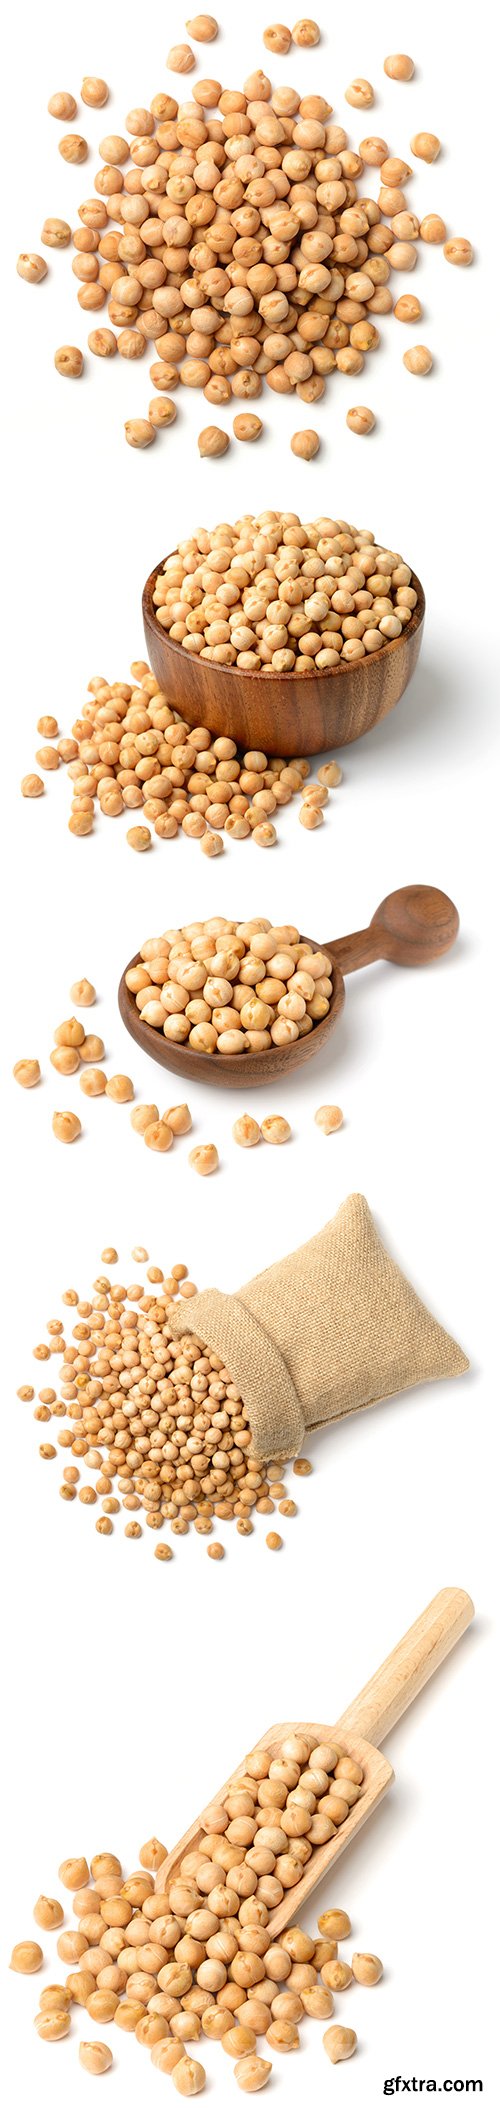 Dried Chickpeas Isolated - 6xJPGs